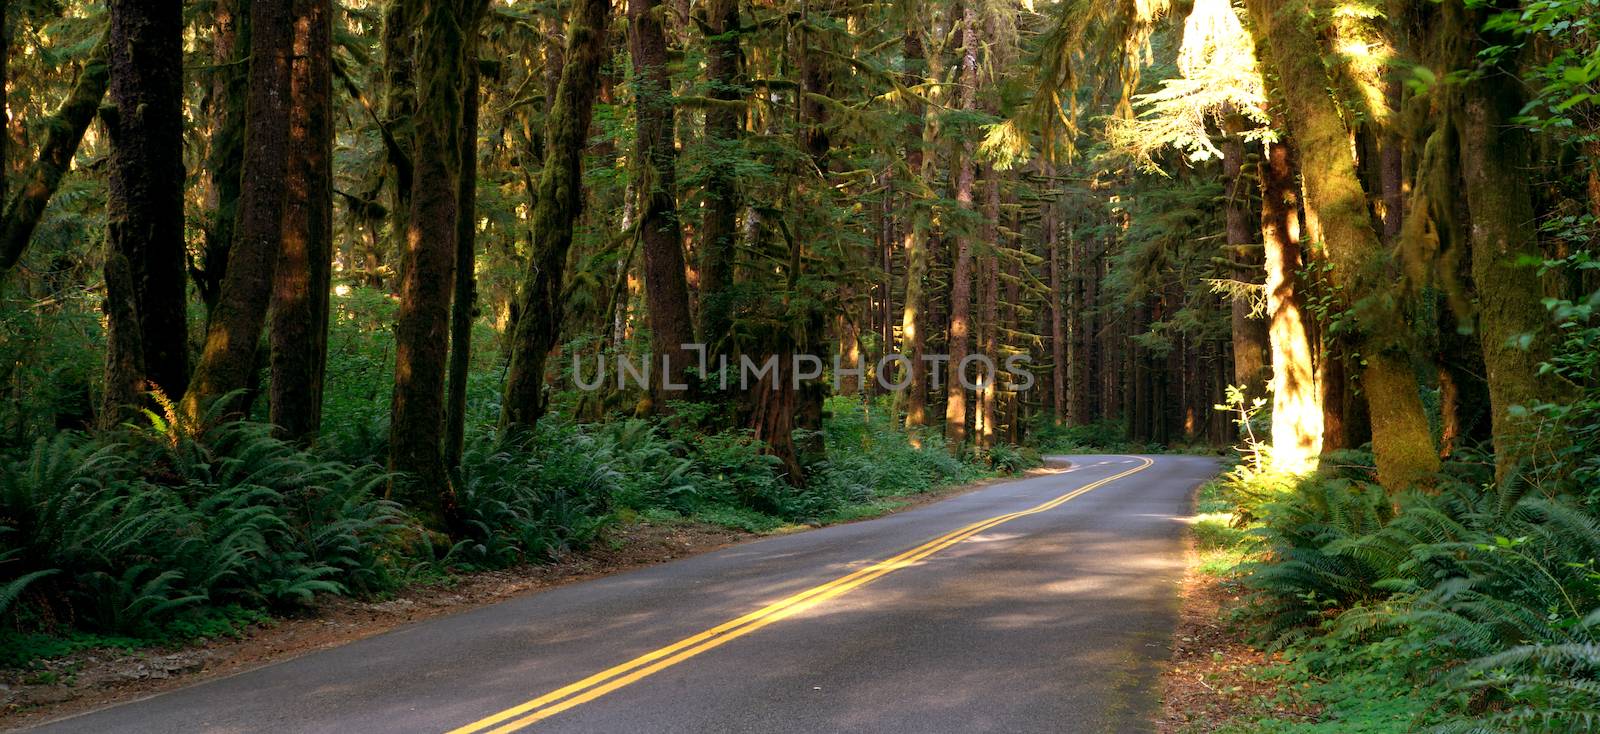 Two Lane Road Cuts Through Rainforest by ChrisBoswell